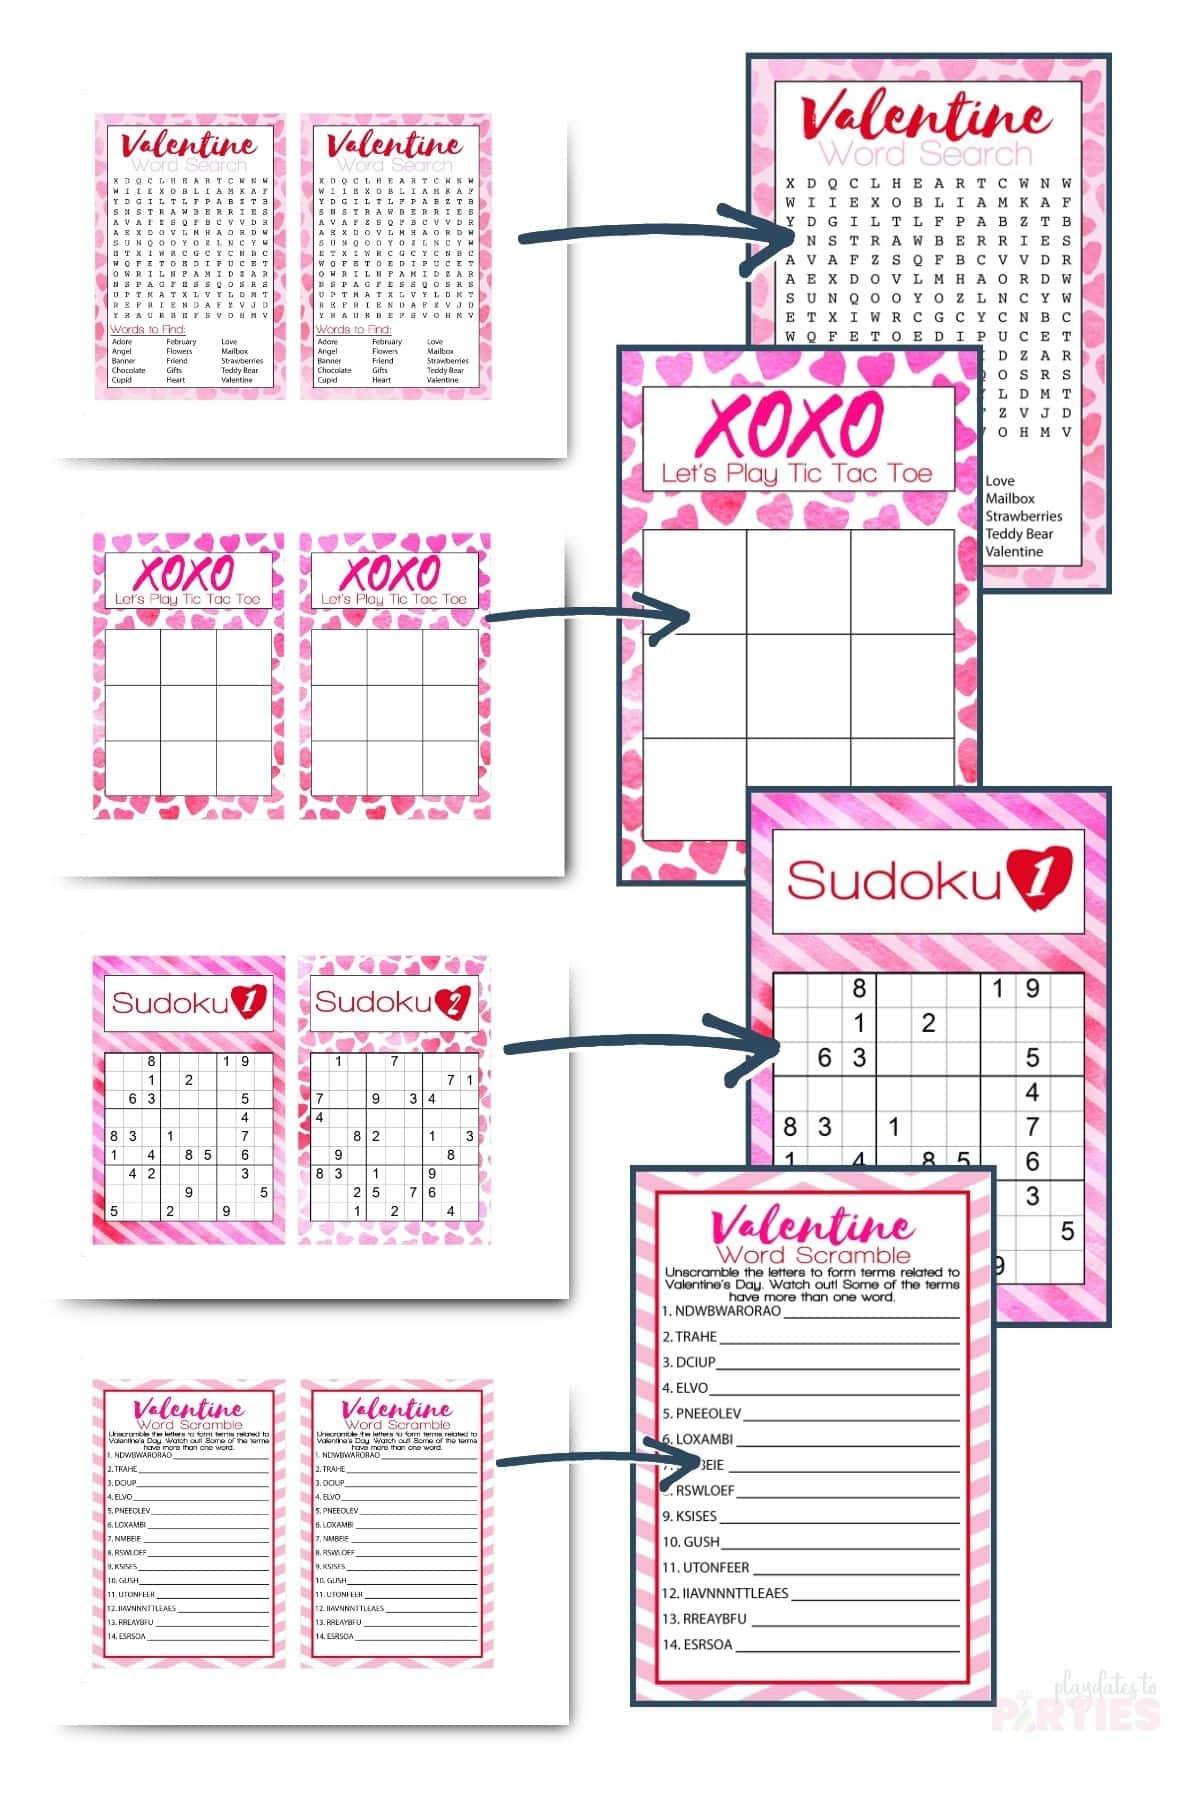 Valentine puzzle games pages with close ups of the individual cards.